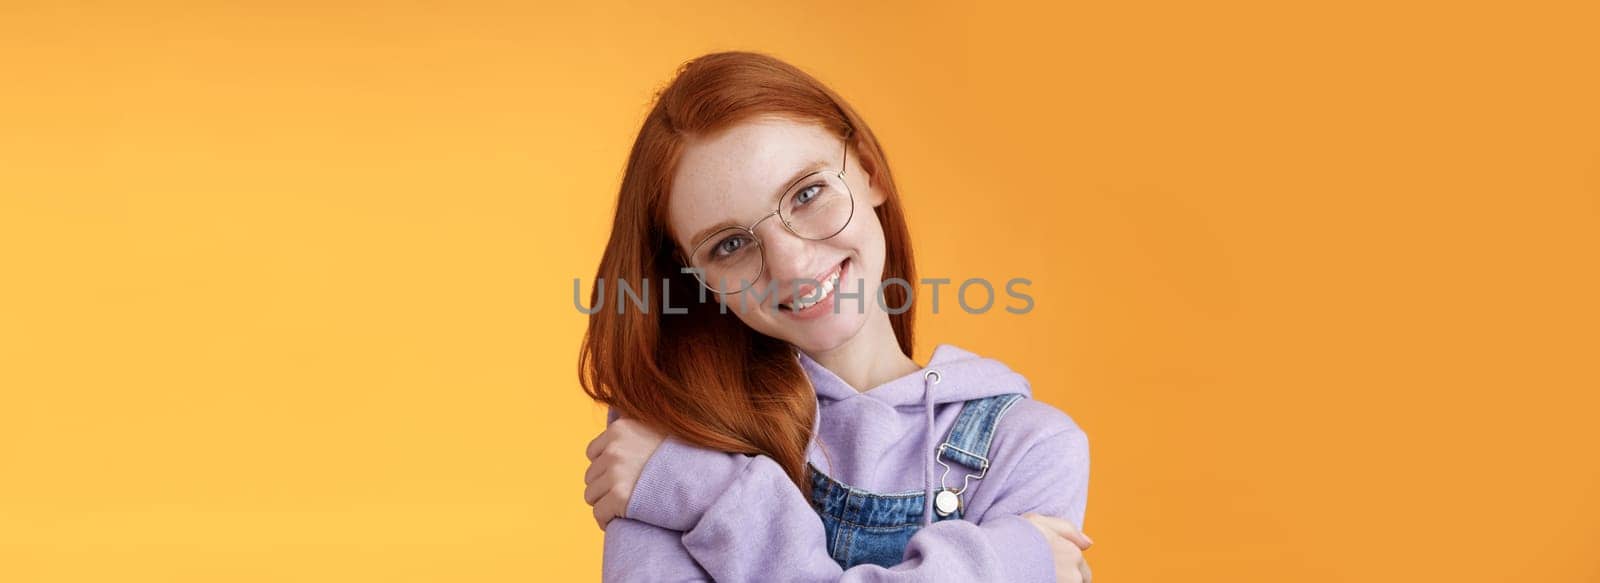 Passion, tenderness, wellbeing concept. Girl accept own self smiling charming grin tilt head hugging herself embracing body feel happiness delighted relaxing, flirty gaze camera orange background.